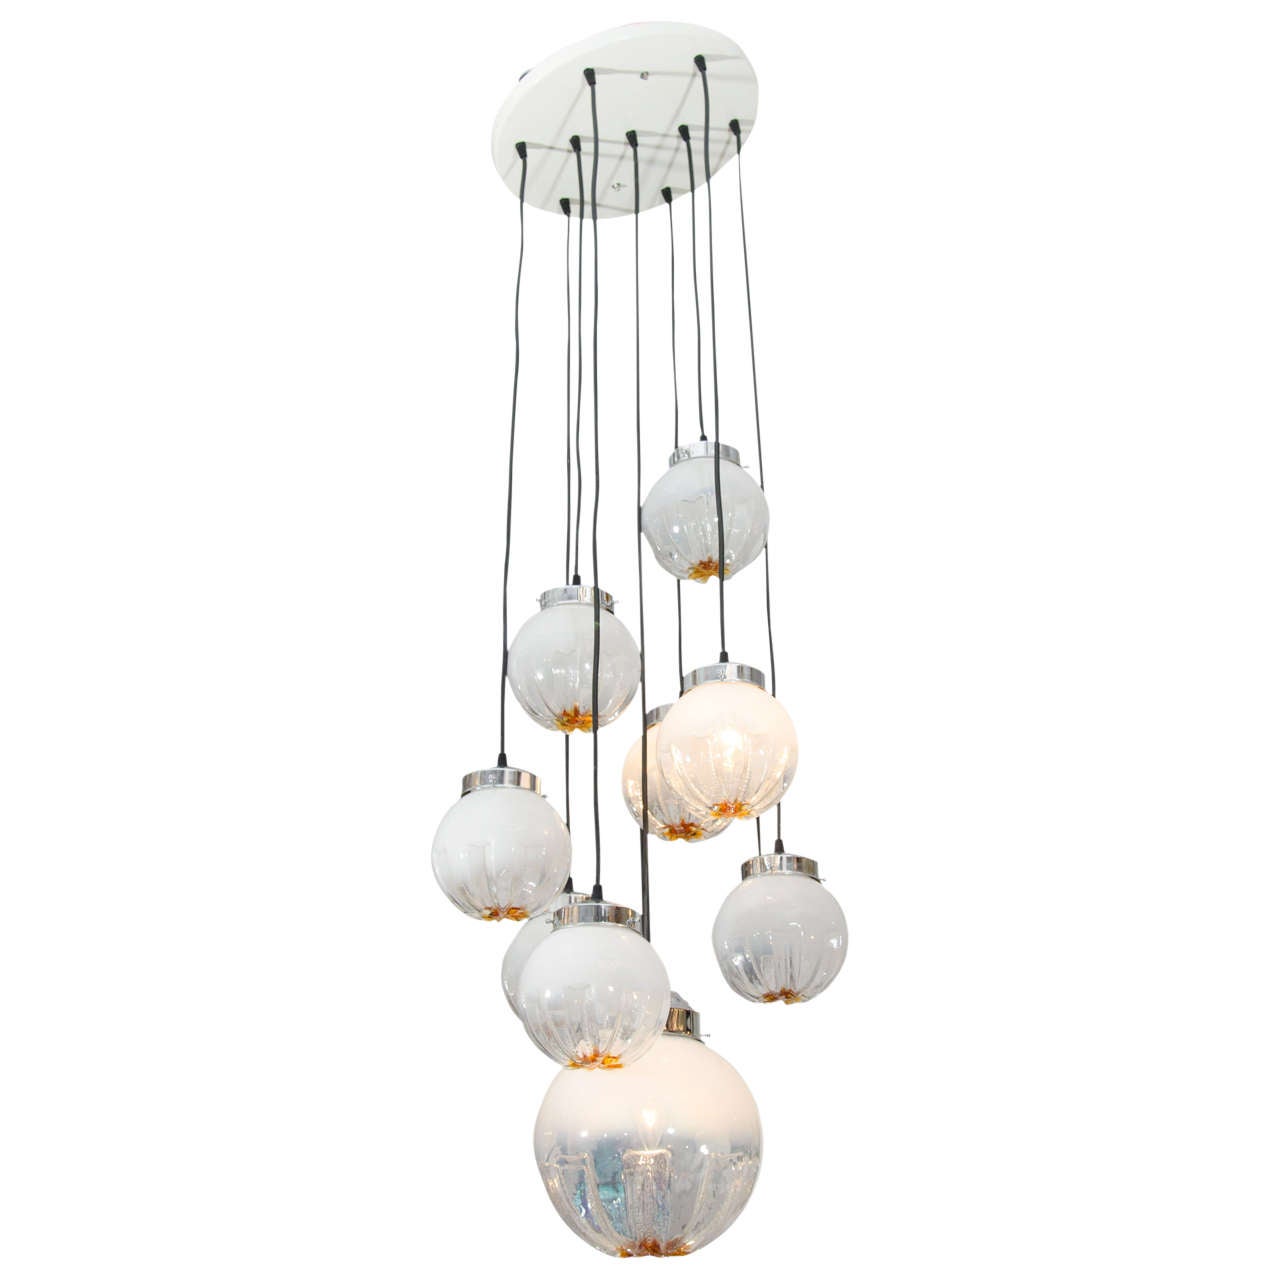 1970s Mazzega Pendant Chandelier with Nine Opaline and Amber Globes